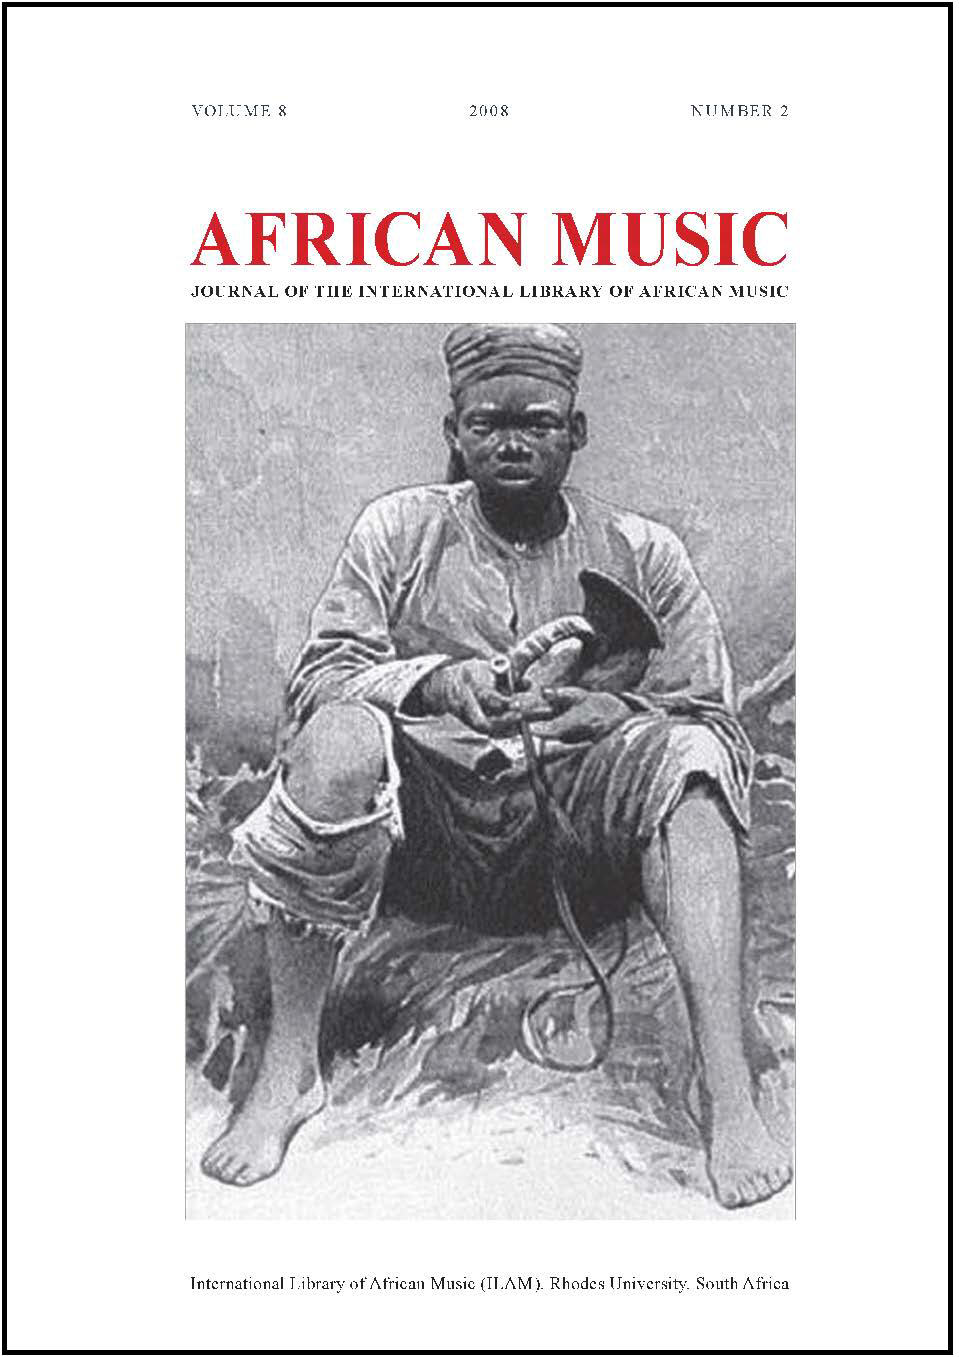 					View Vol. 8 No. 2 (2008): African Music: Journal of the International Library of African Music
				